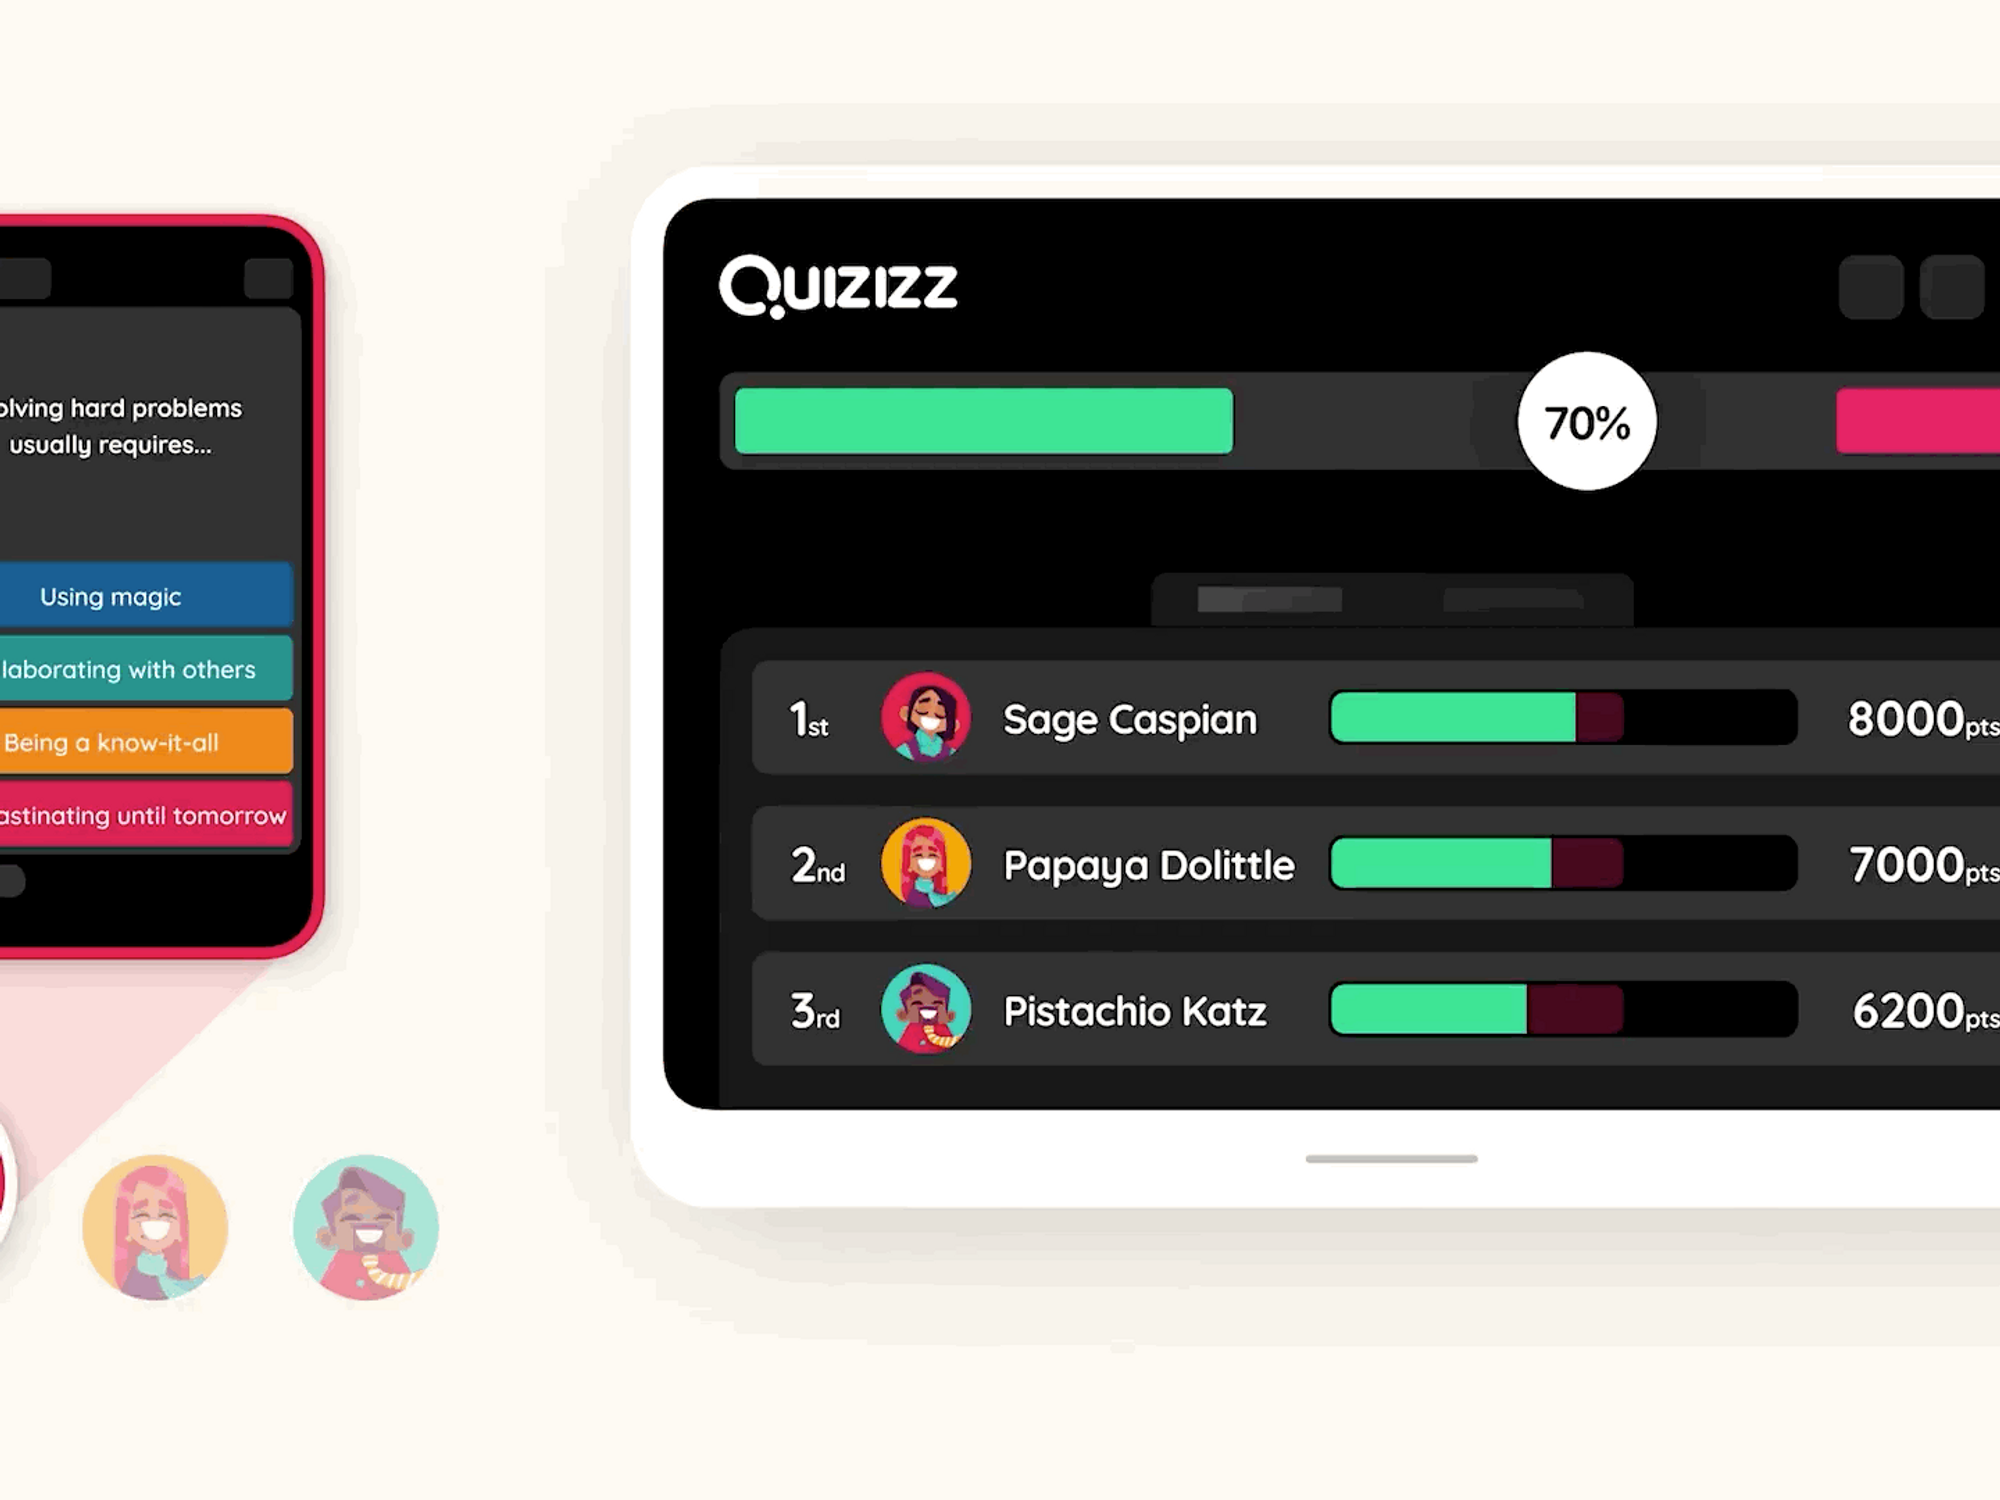 Gamified Education Startup Quizizz Is About to Expand in Santa Monica